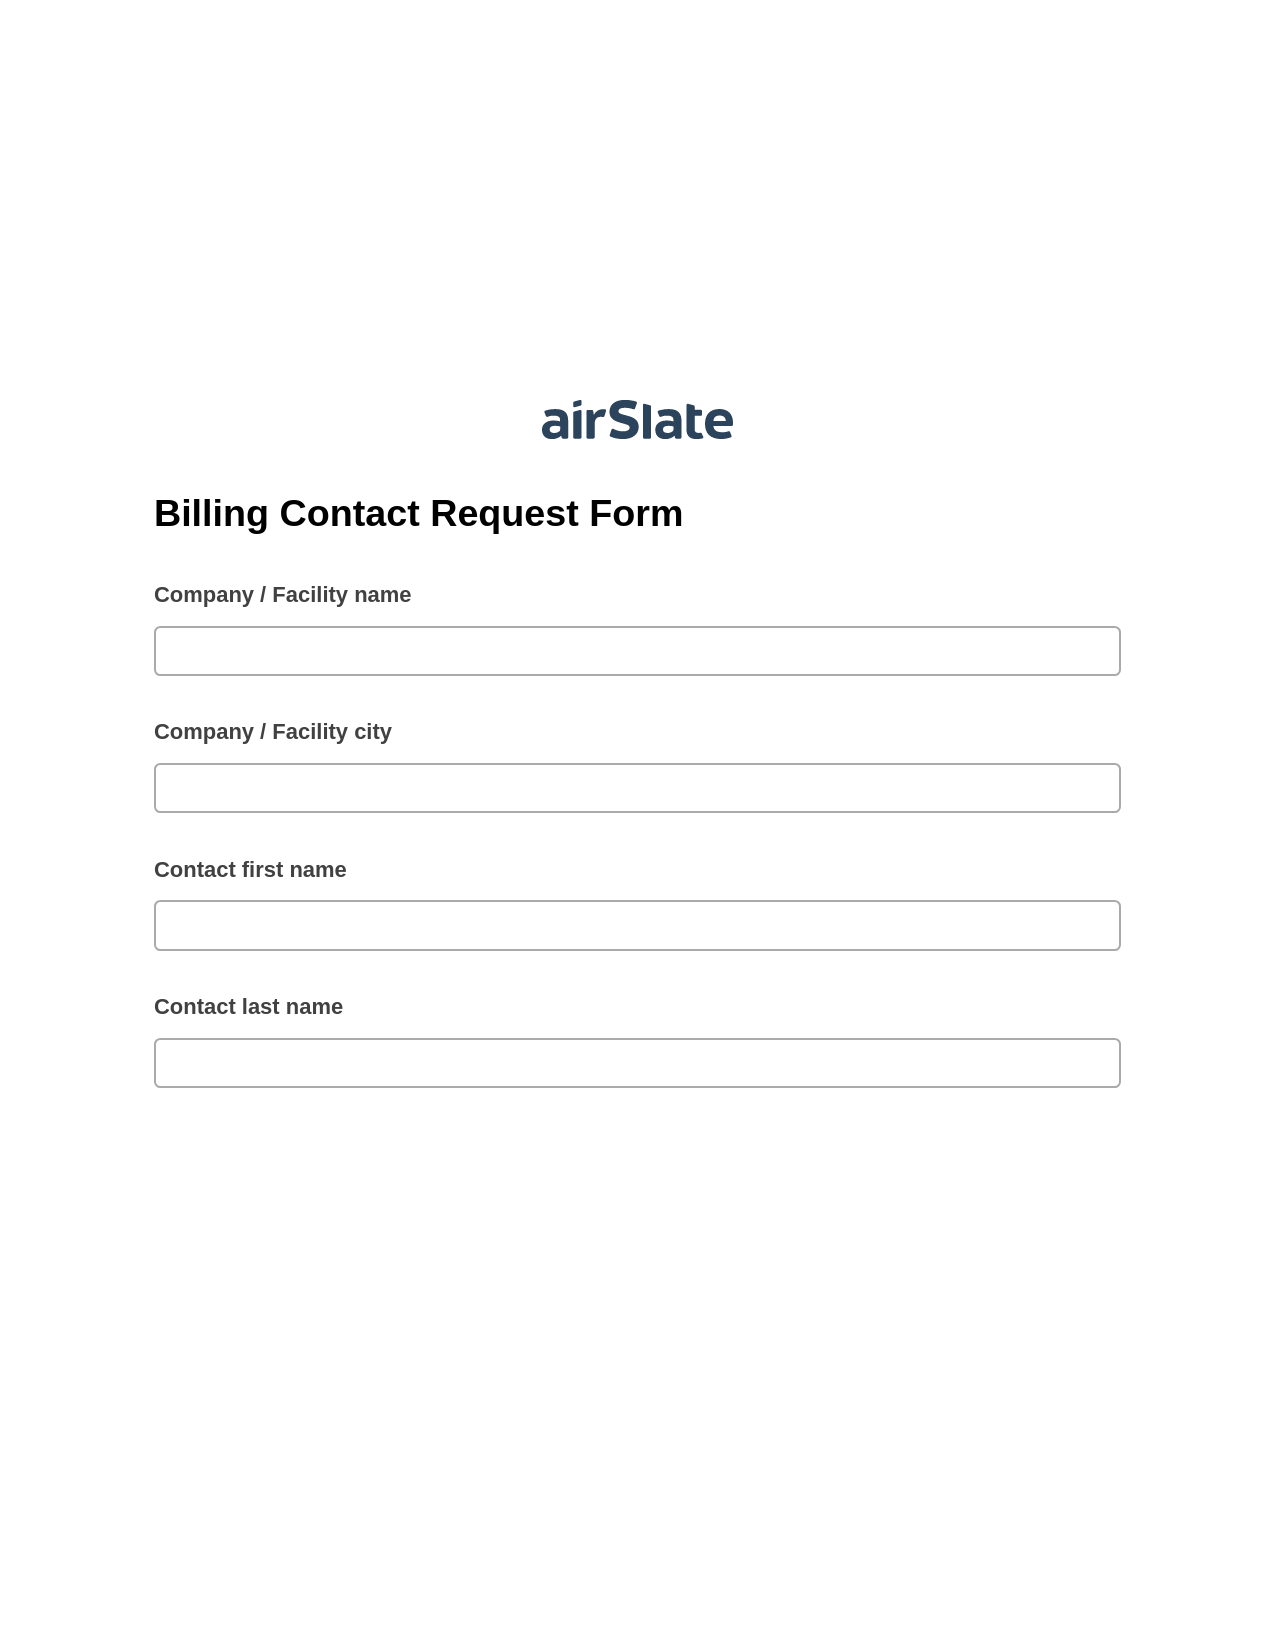 Billing Contact Request Form Pre-fill Dropdown from Airtable, Send Mailchimp Campaign Bot, Dropbox Bot